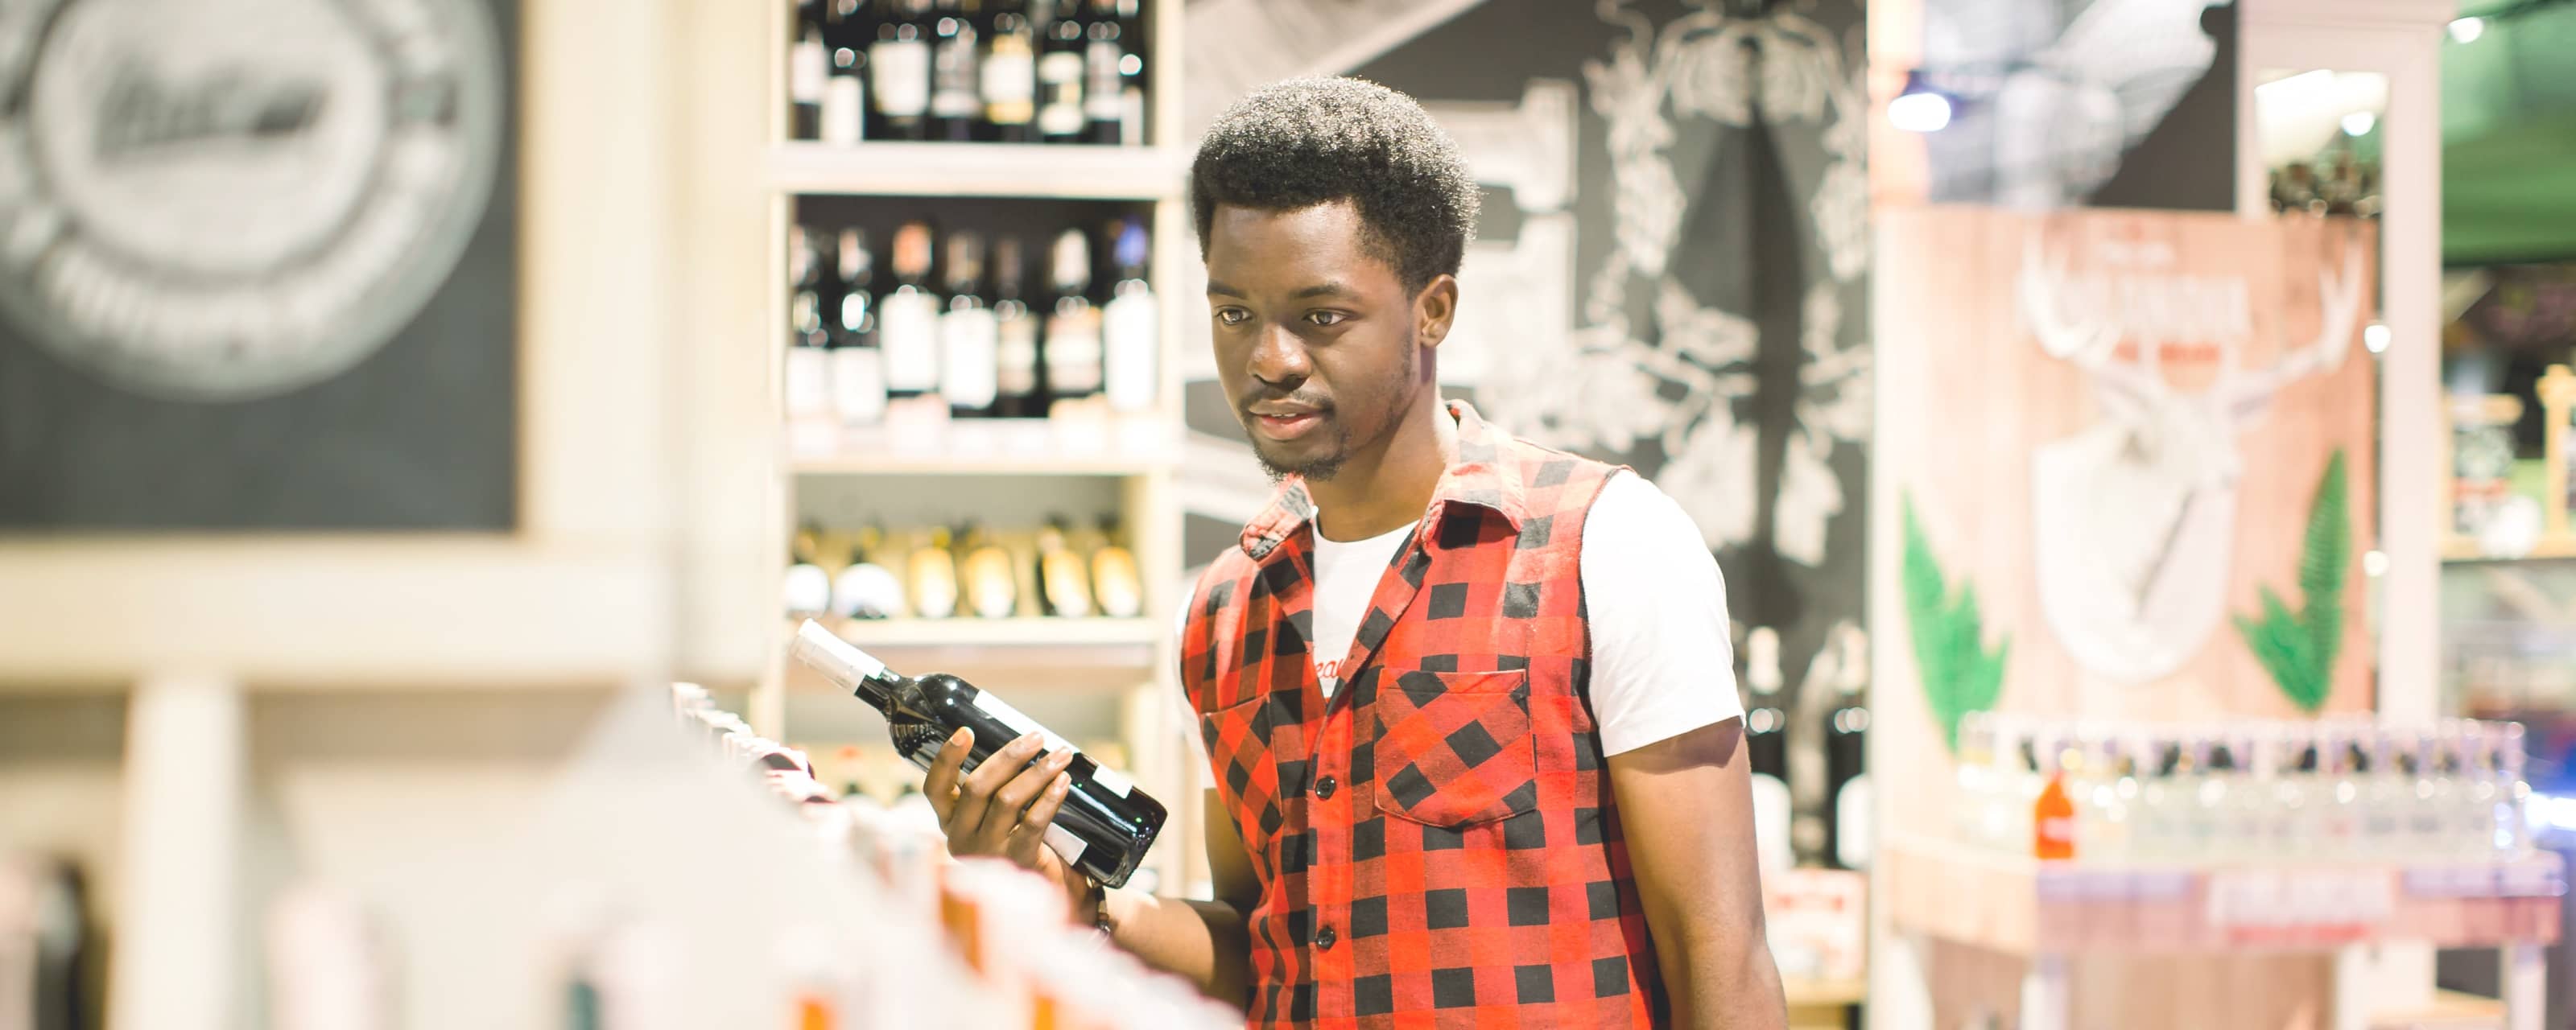 Young shopper comparing wines